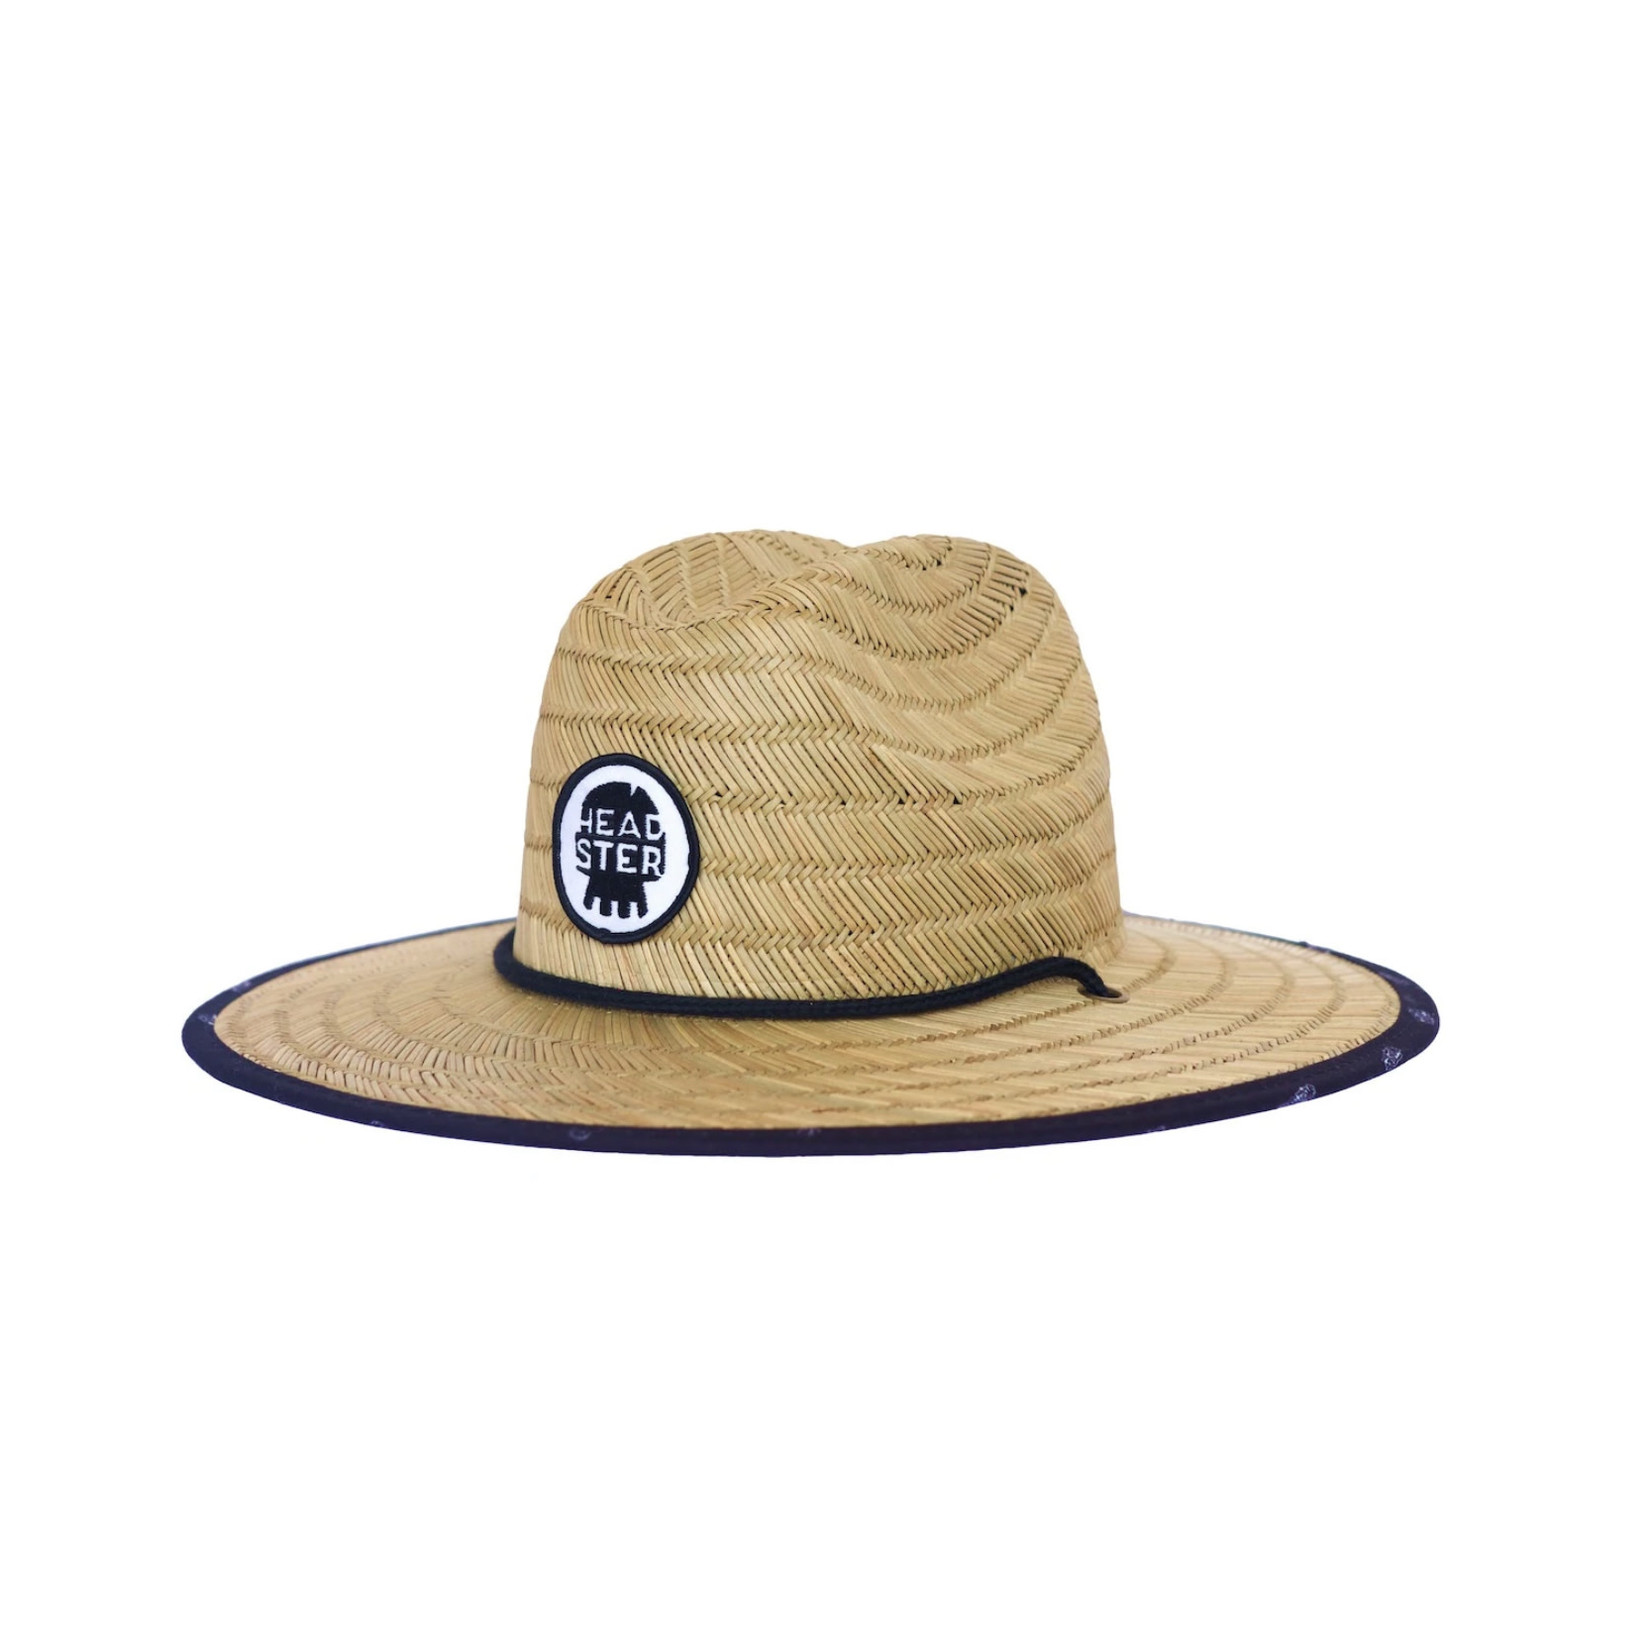 Headster Headster - Lifeguard Classic Hat